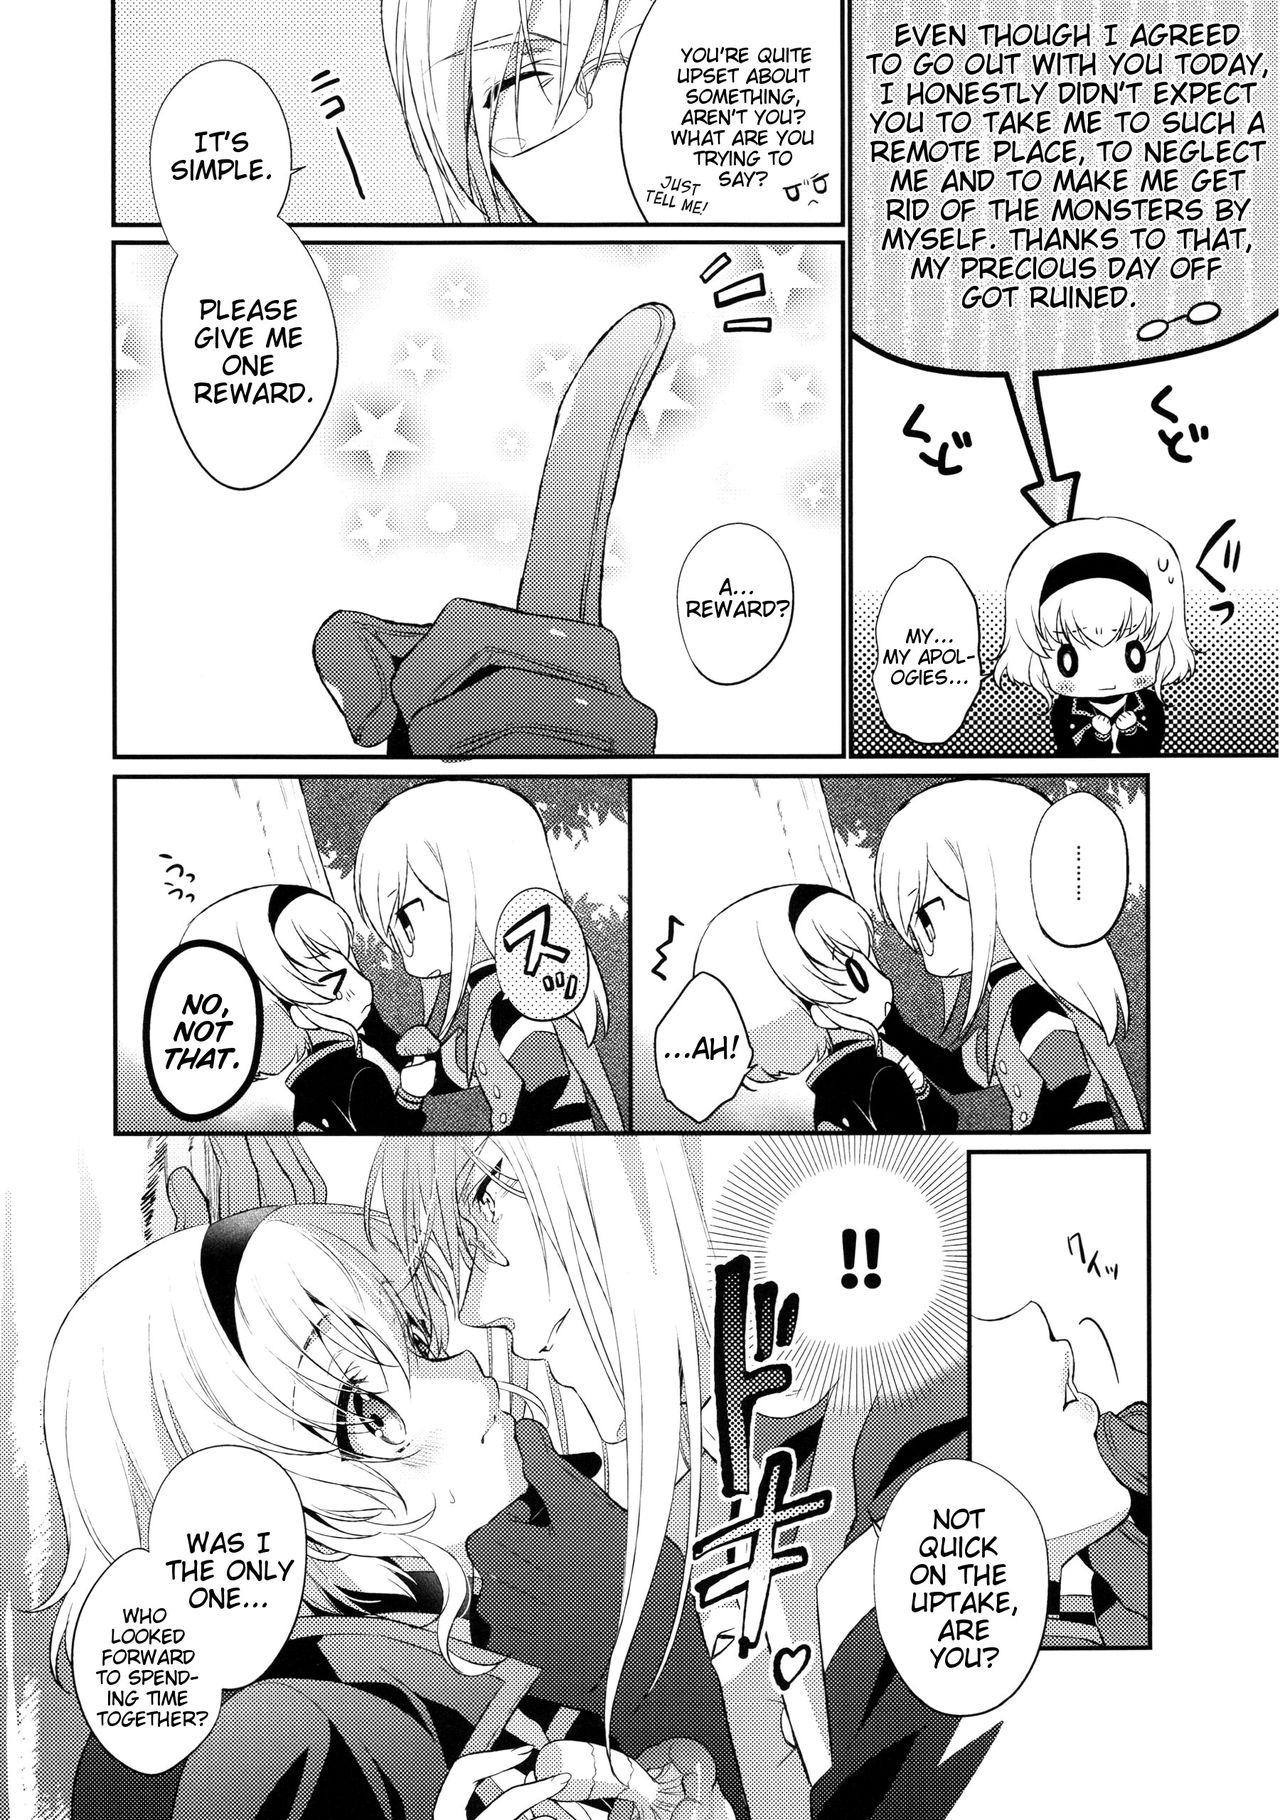 Small Tits Porn Kirakira Girl - Tales of the abyss Big Cock - Page 8